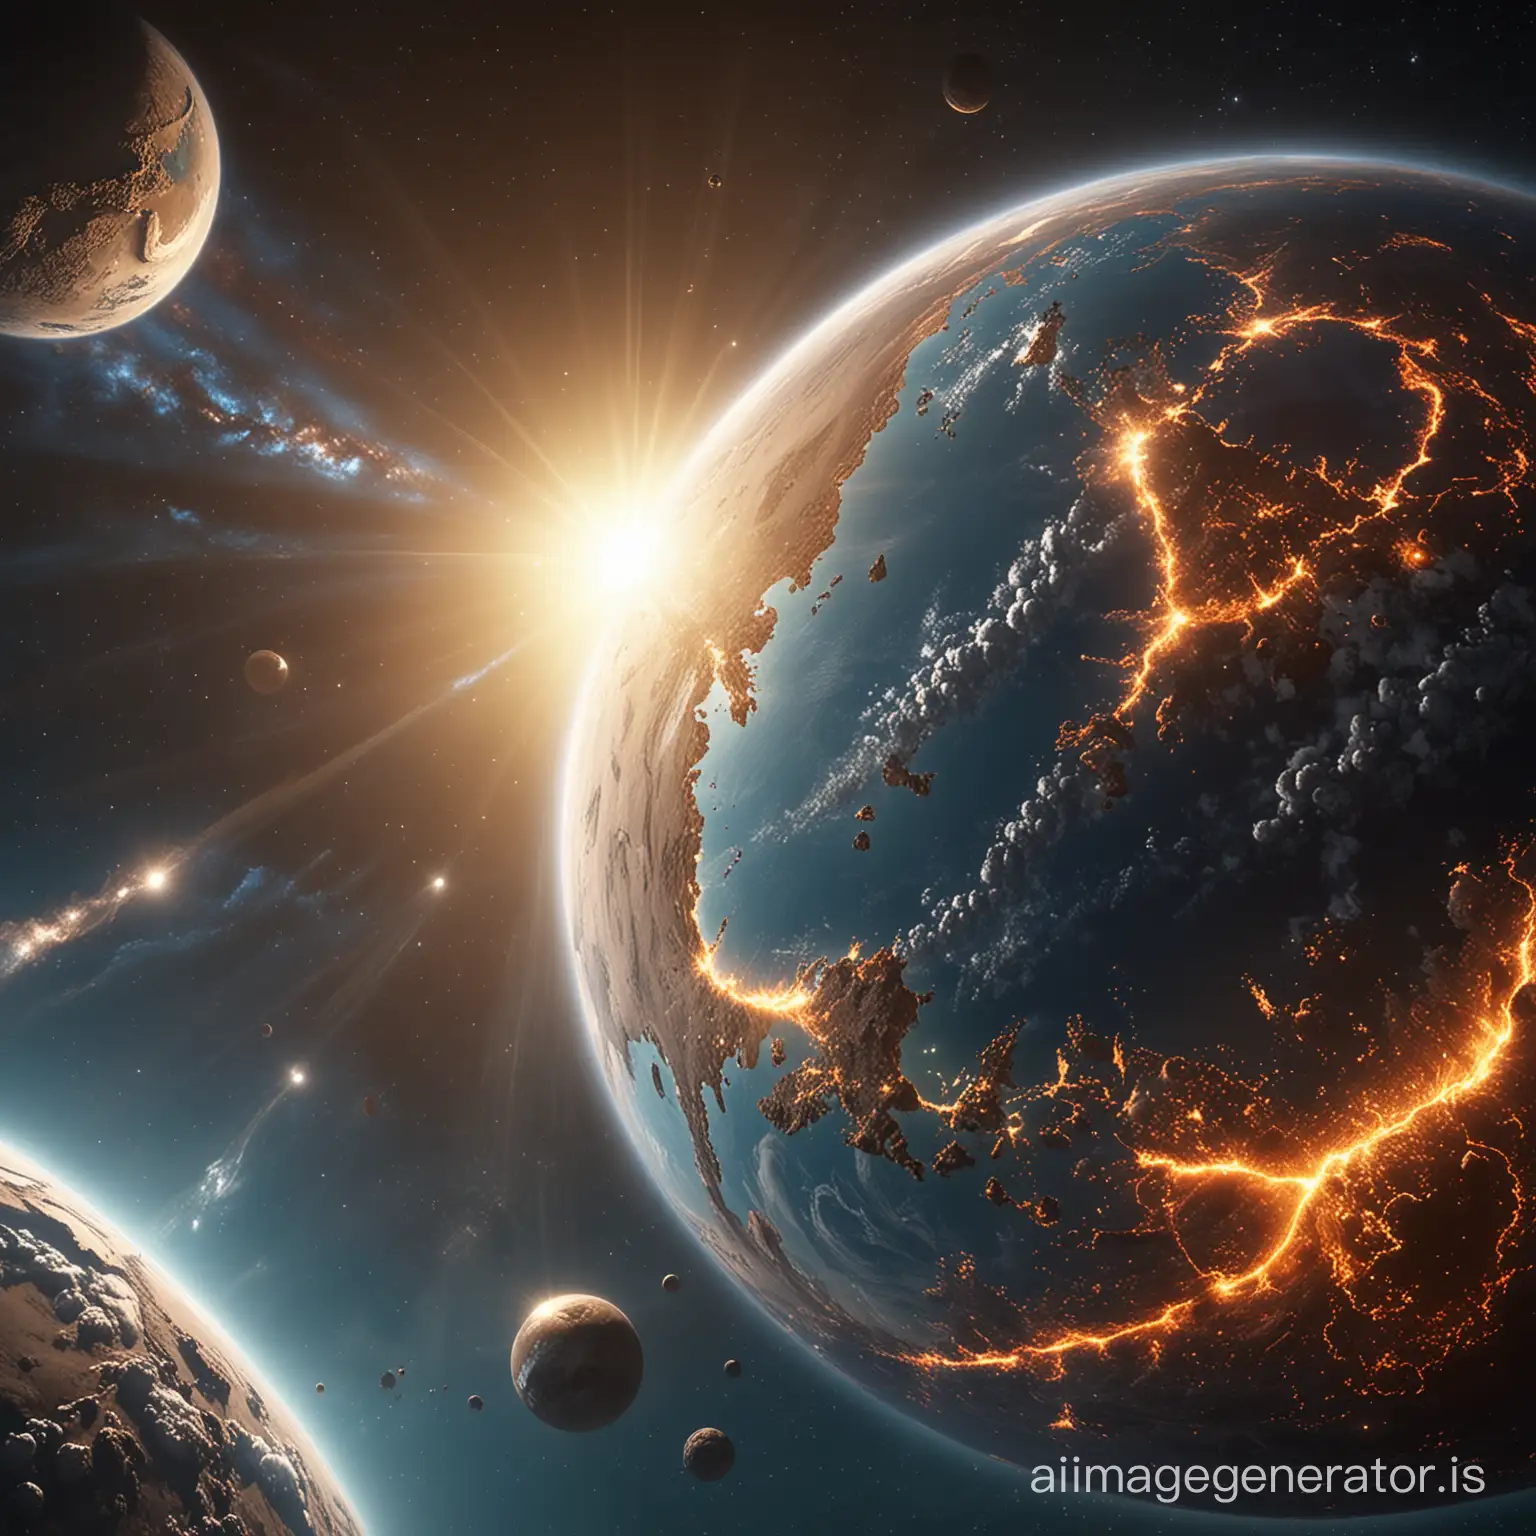 creation of the heavens and earth (Genesis 1:1-5),Ray Tracing Global Illumination,Optics, Scattering,Glow,insanely detailed and intricate,superdetailed